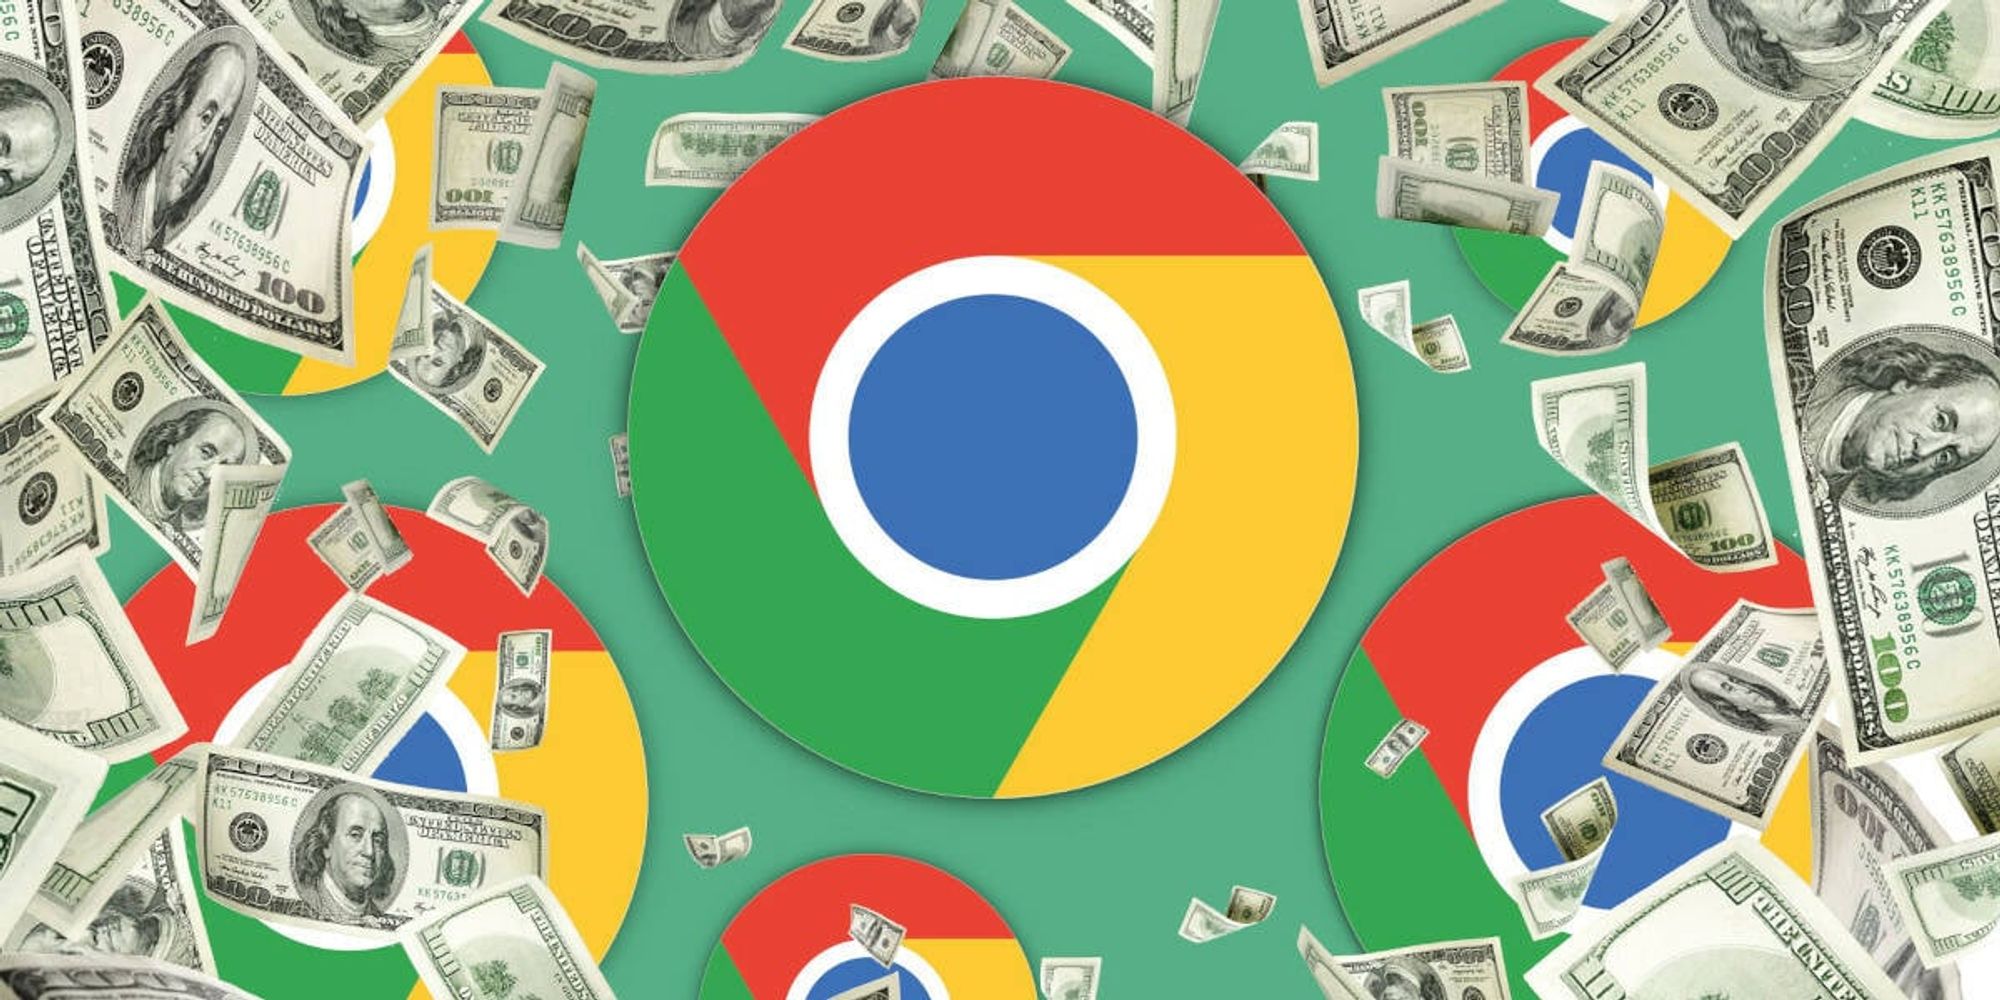 Chromium devs plan to put micropayments in the browser